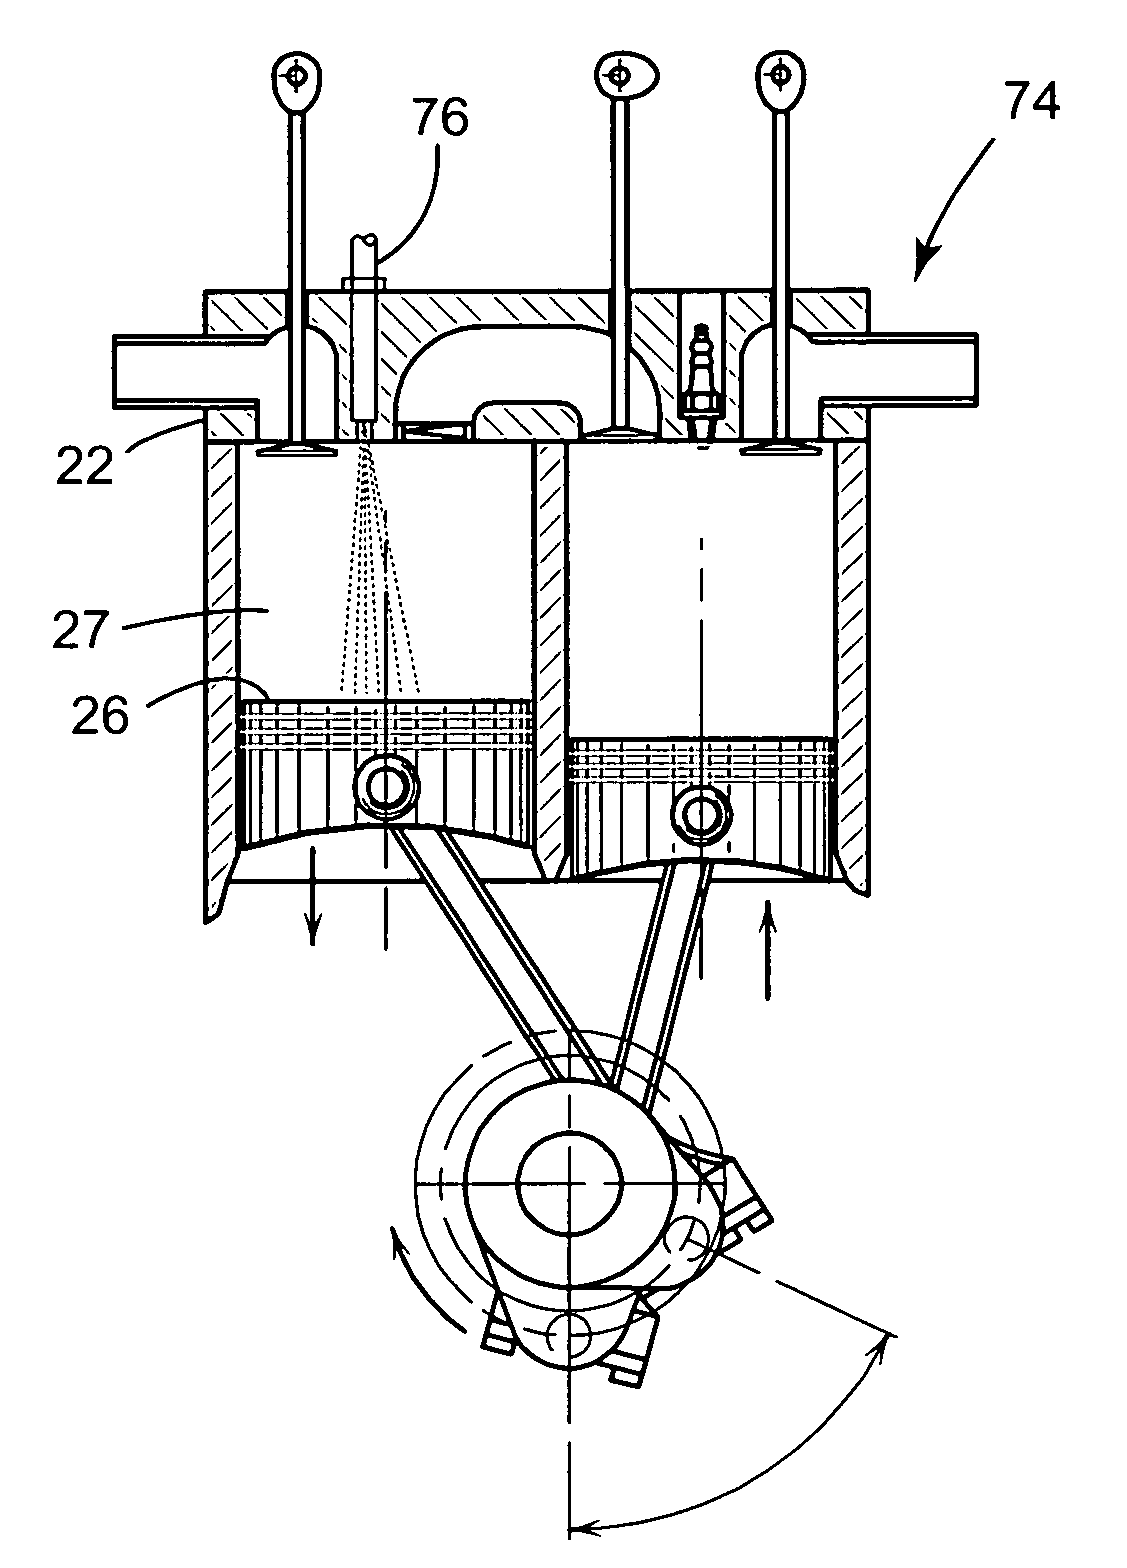 Split-cycle engine with water injection